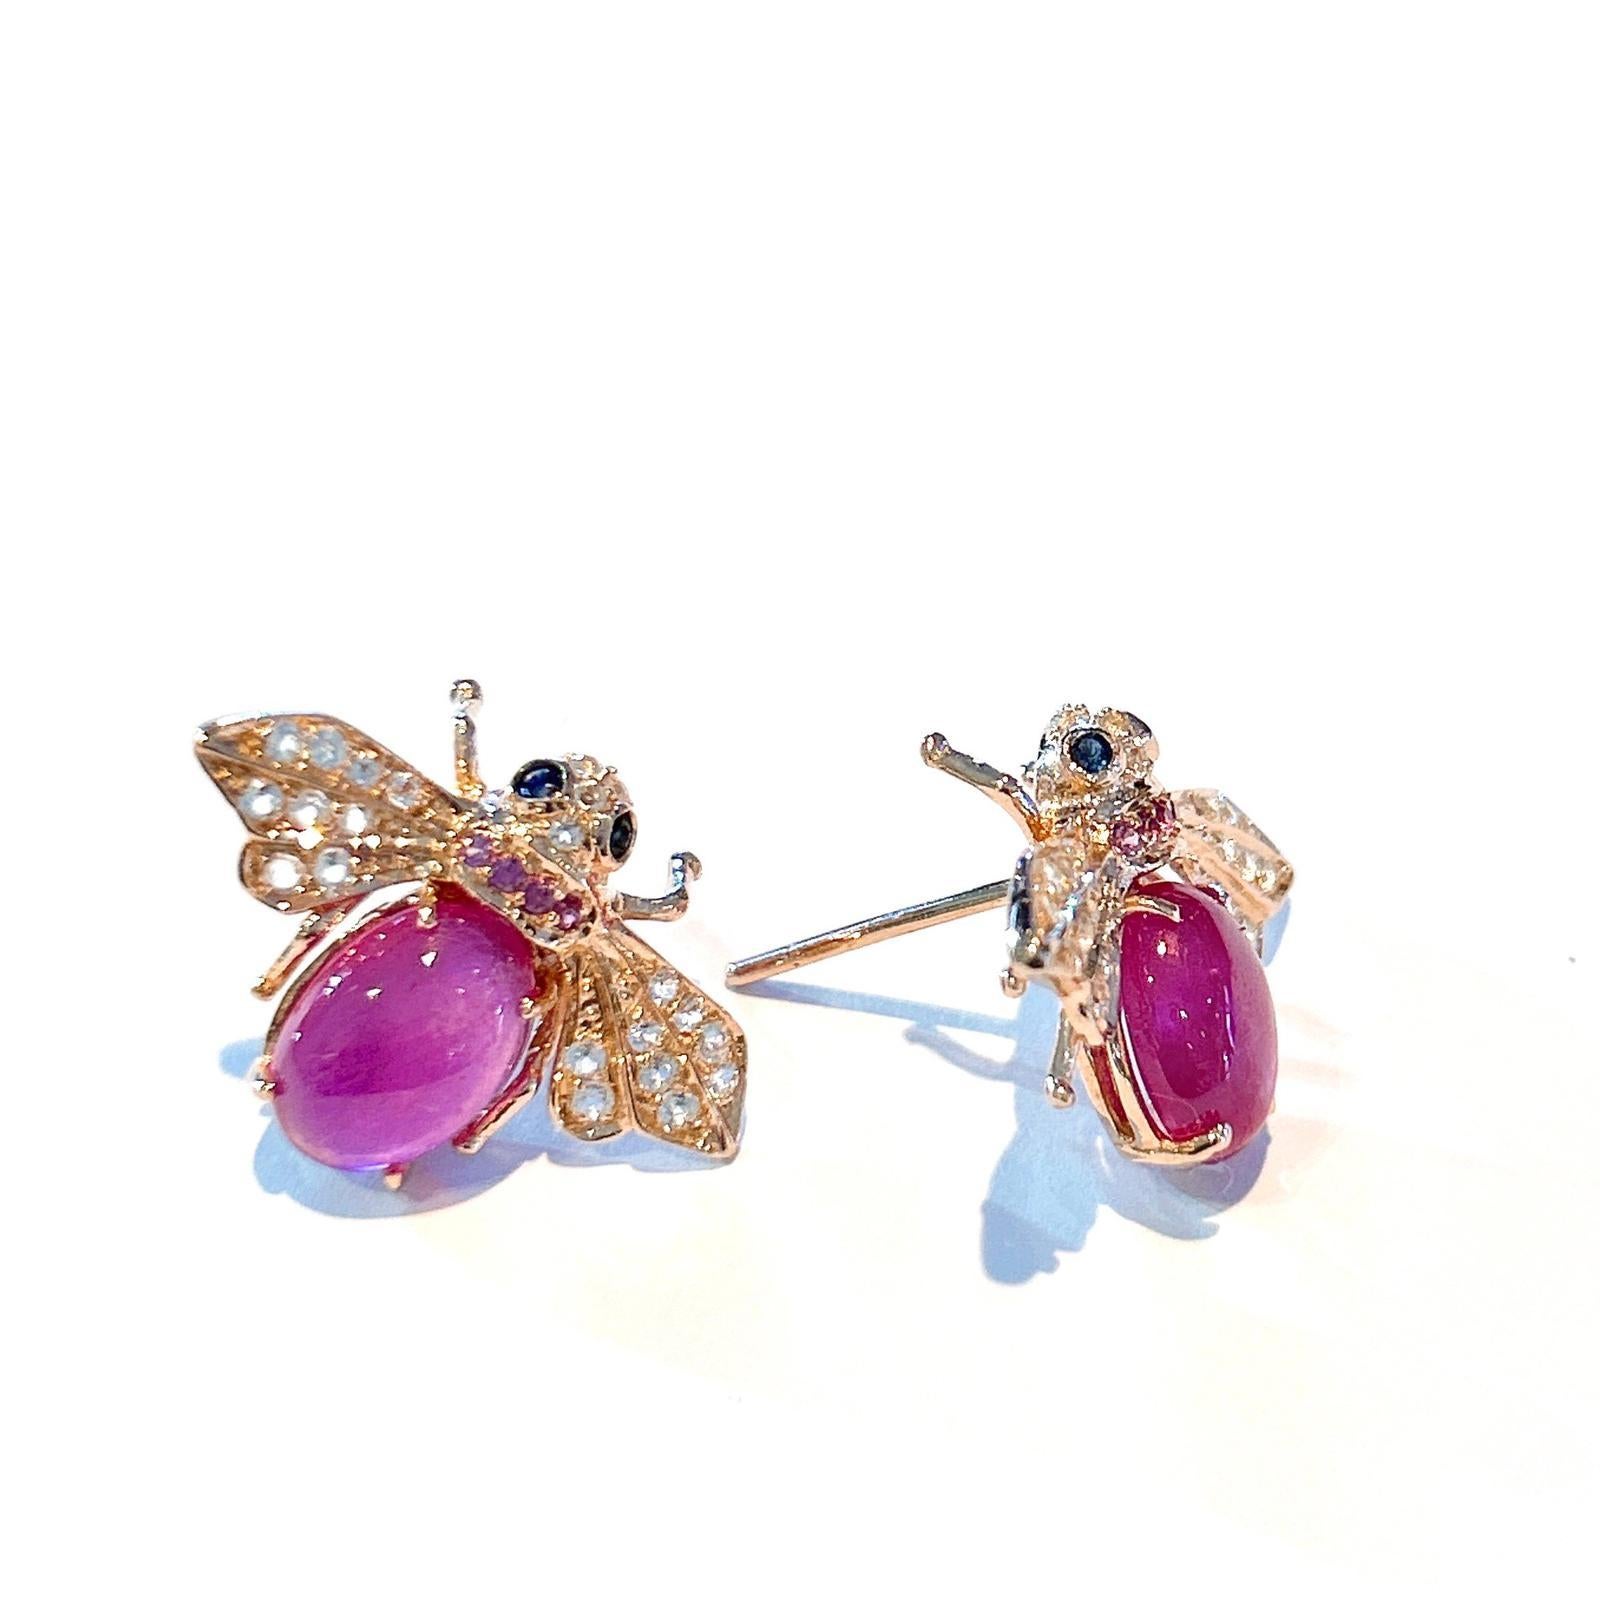 Bochic “Orient” Ruby Earrings with White Topaz & Blue Sapphire Set in 22k Gold For Sale 1